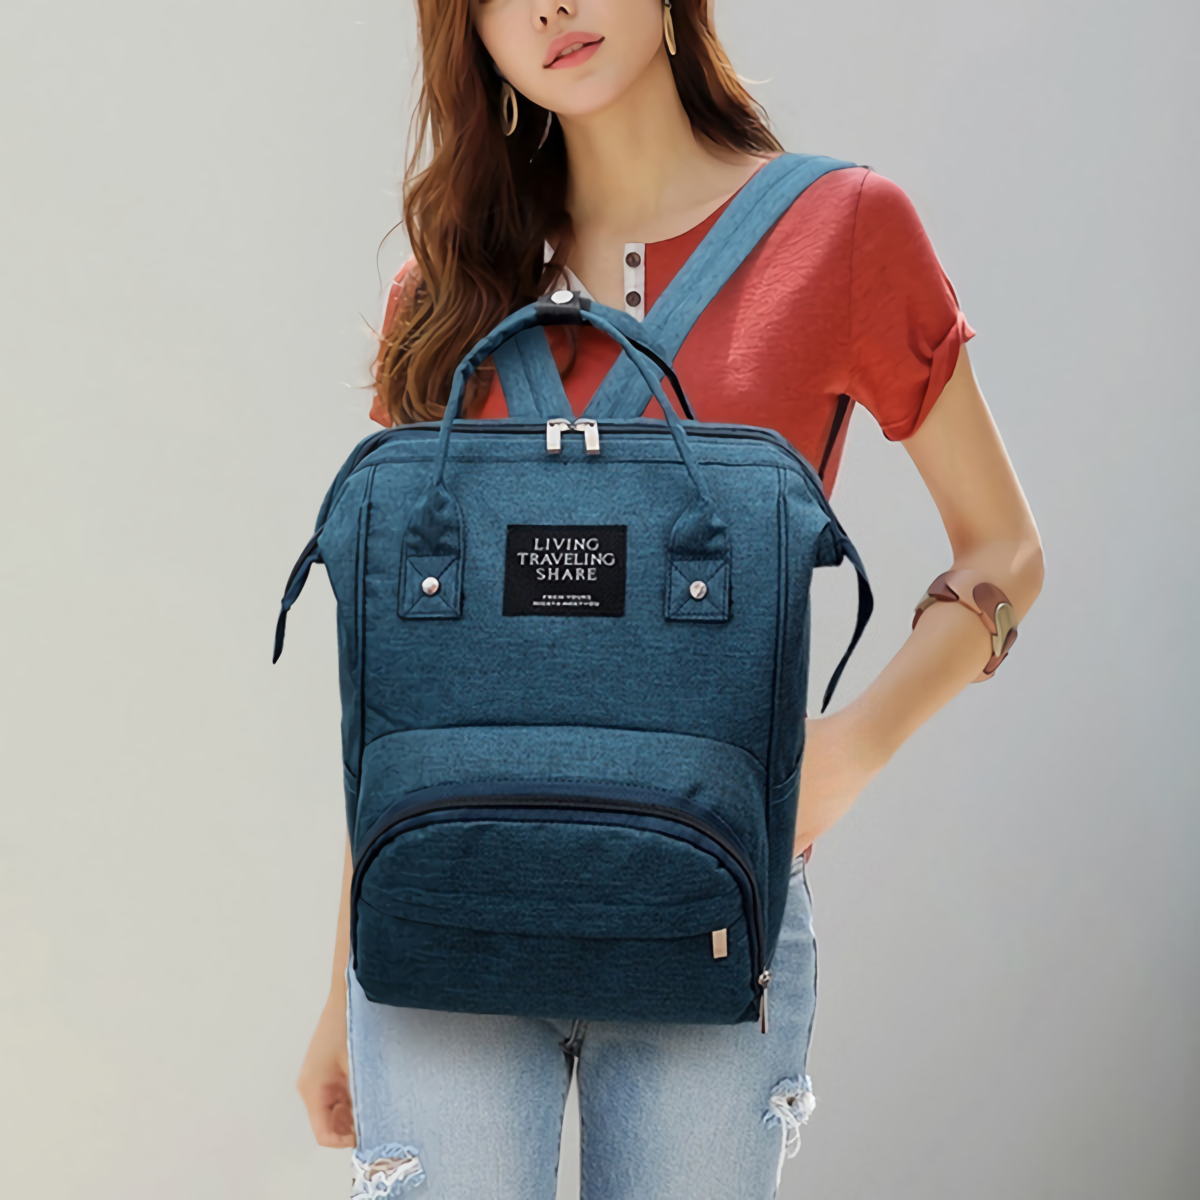 New-Fashion-Large-Travel-Mommy-Backpacks-Solid-Color-Oxford-Cloth-Baby-Nursing-Nappy-Bags-Waterproof-1631399